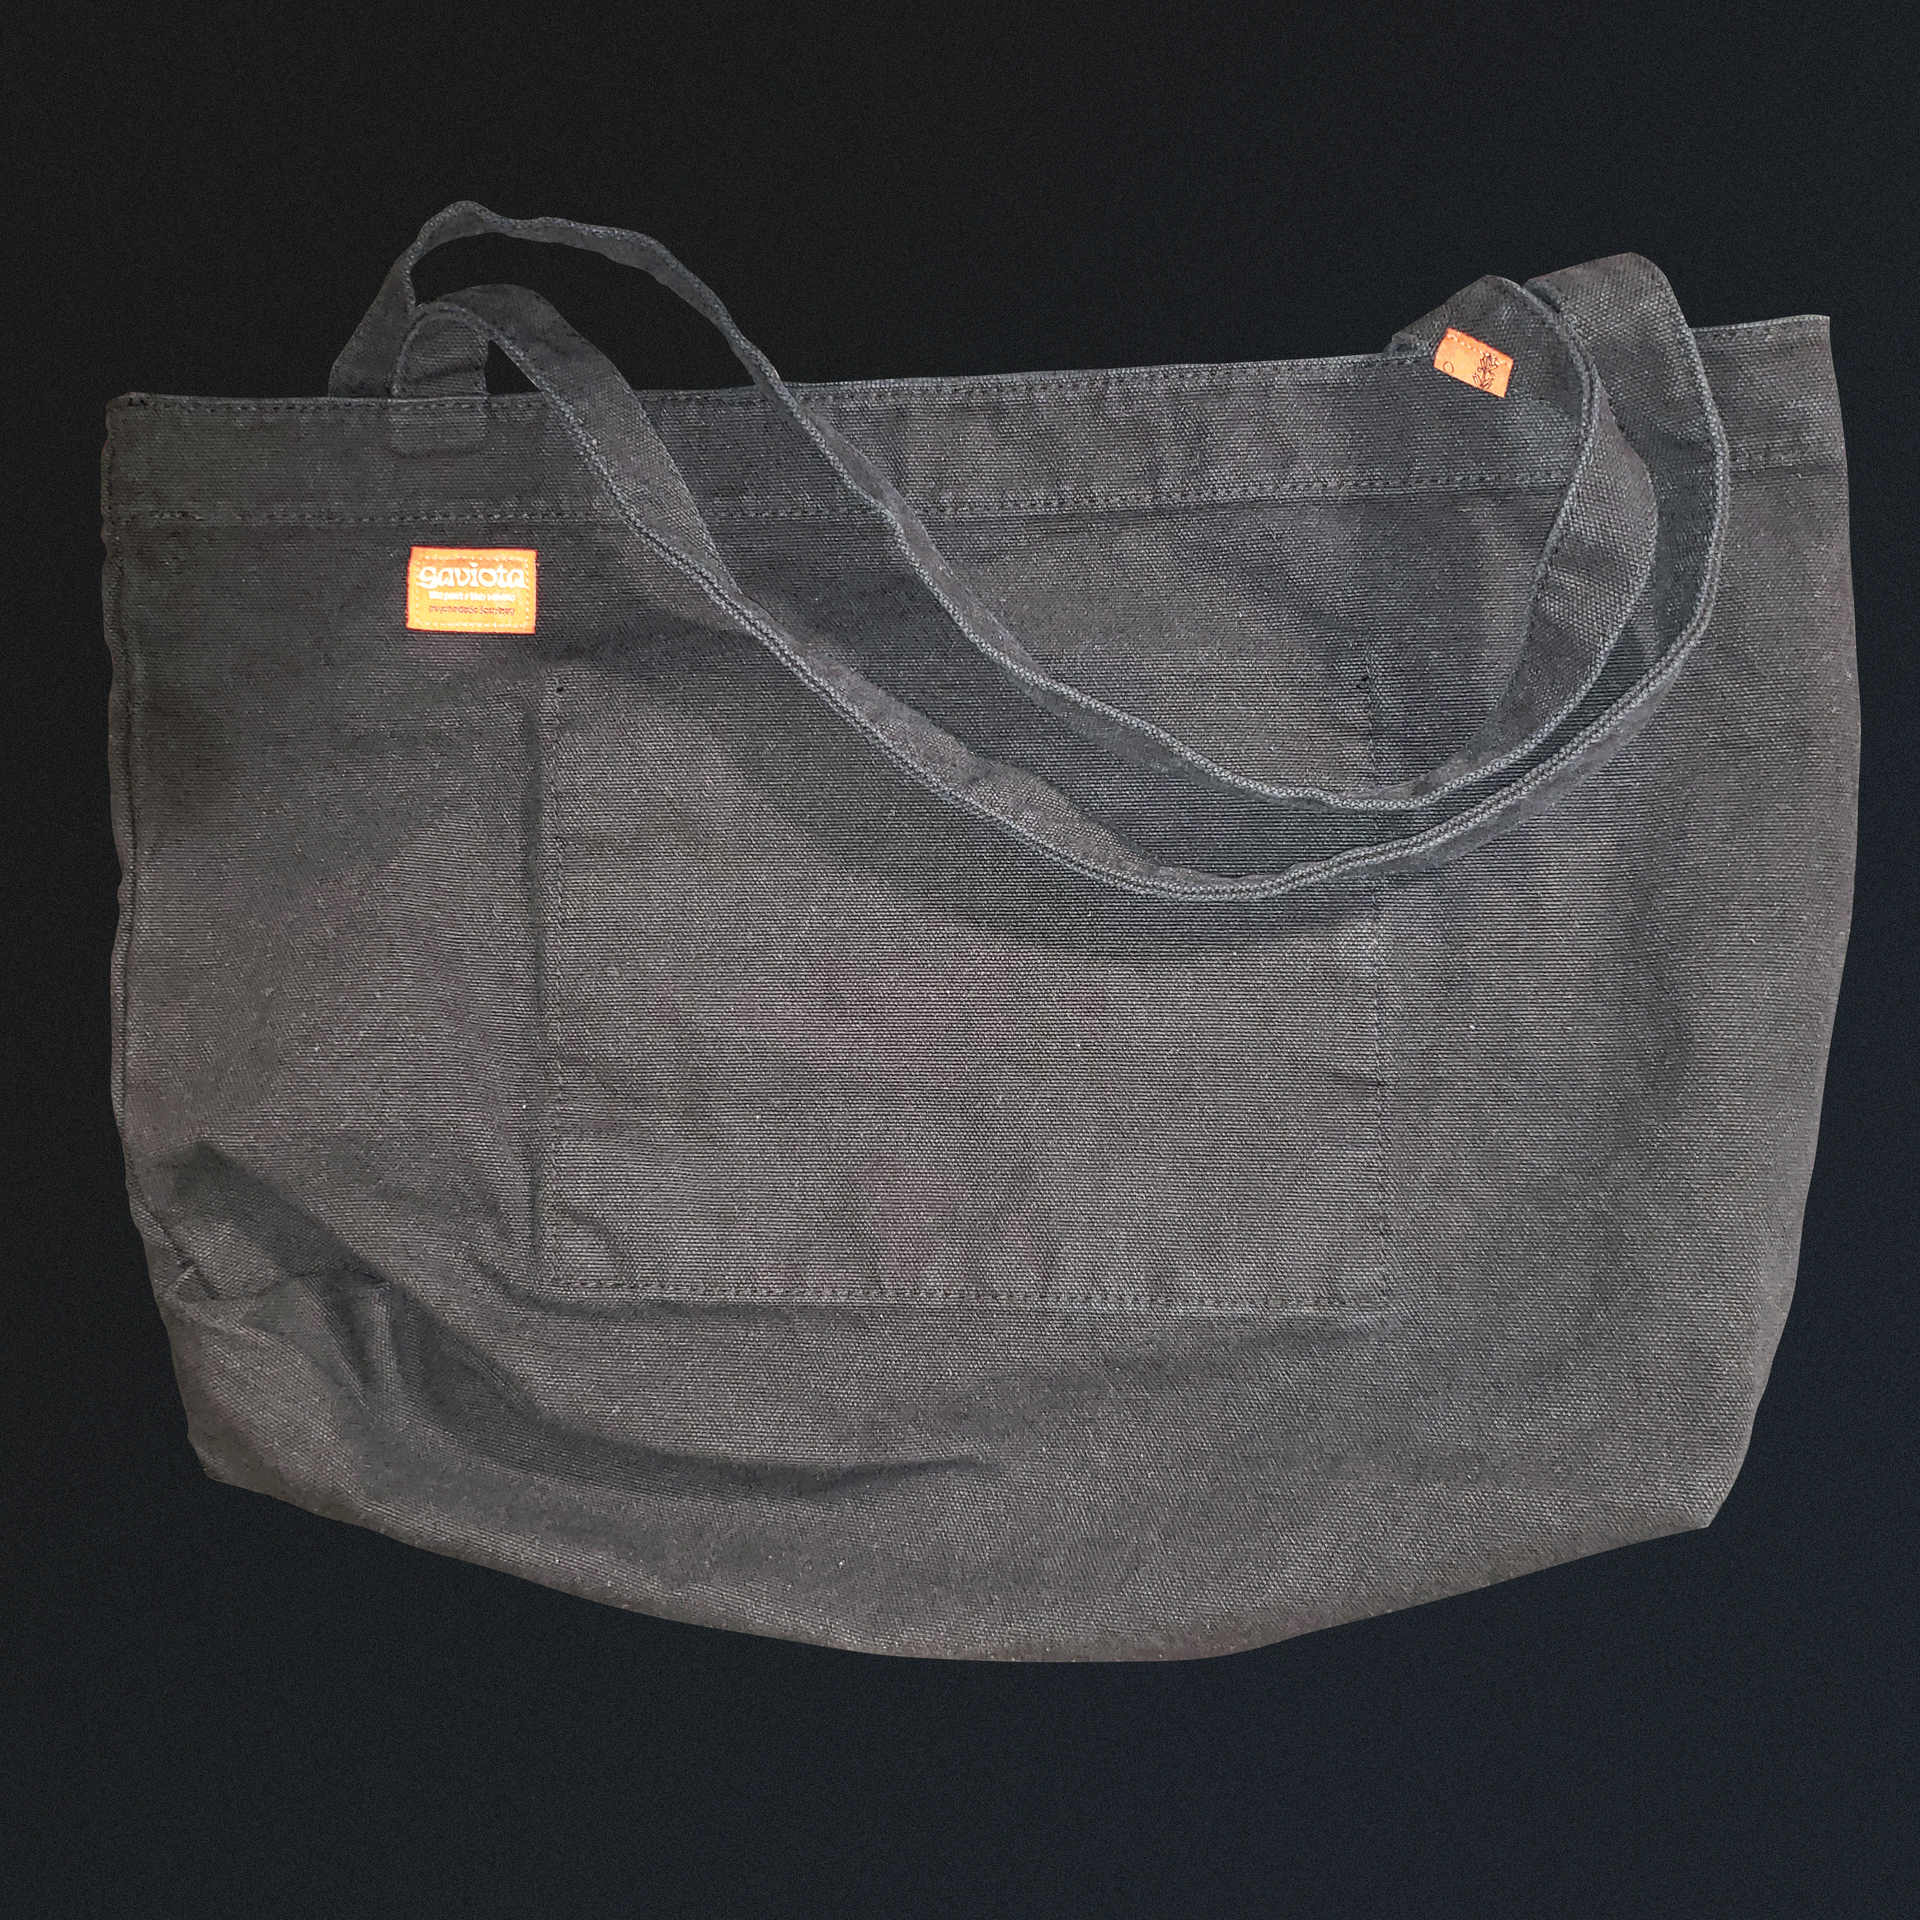 Brown Canvas Tote